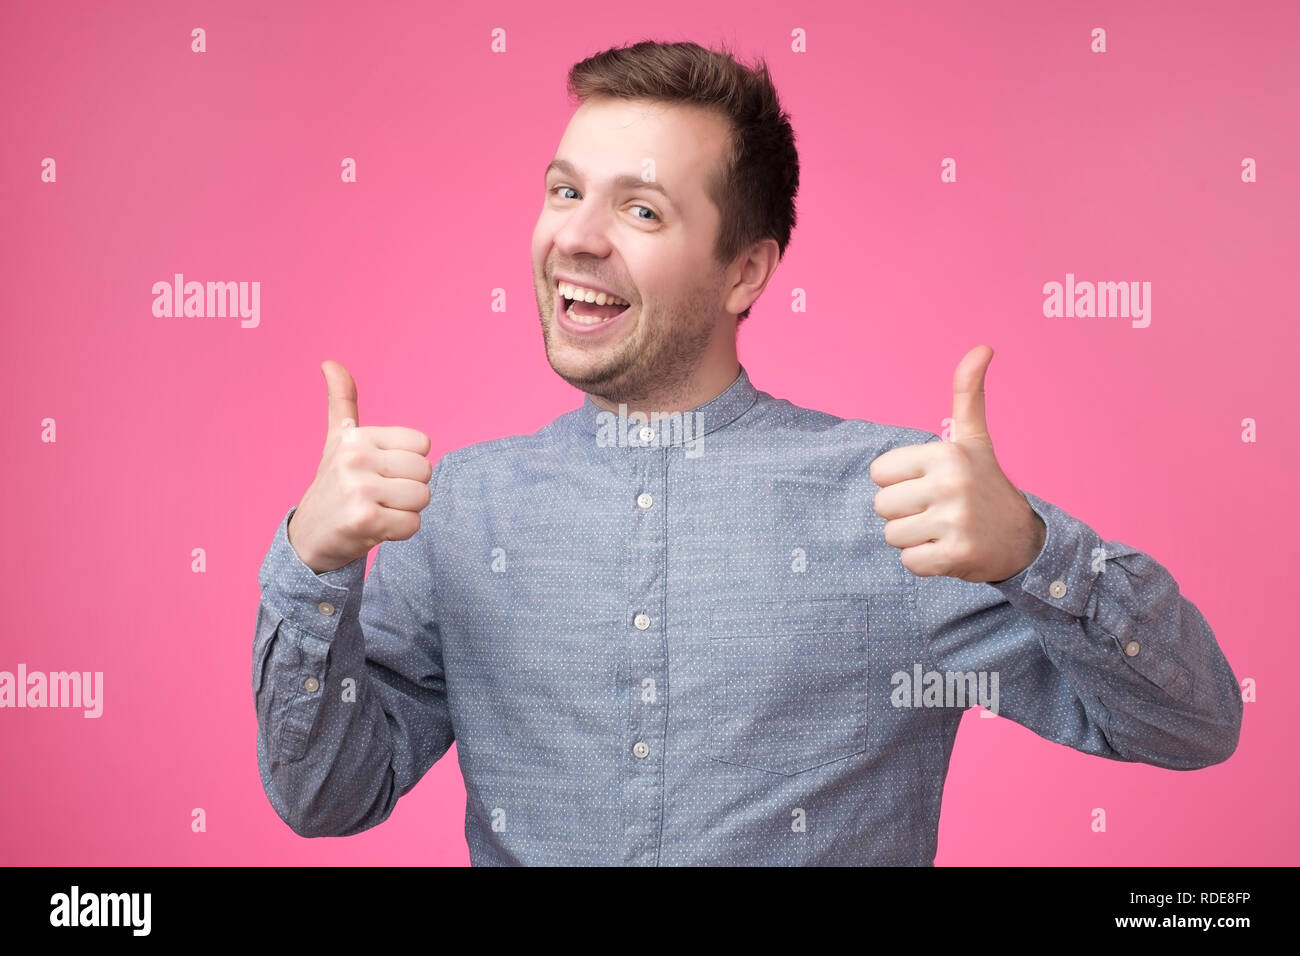 Young attractive man dressed in blue shirt showing thumbs up standing over pink background Stock Photo